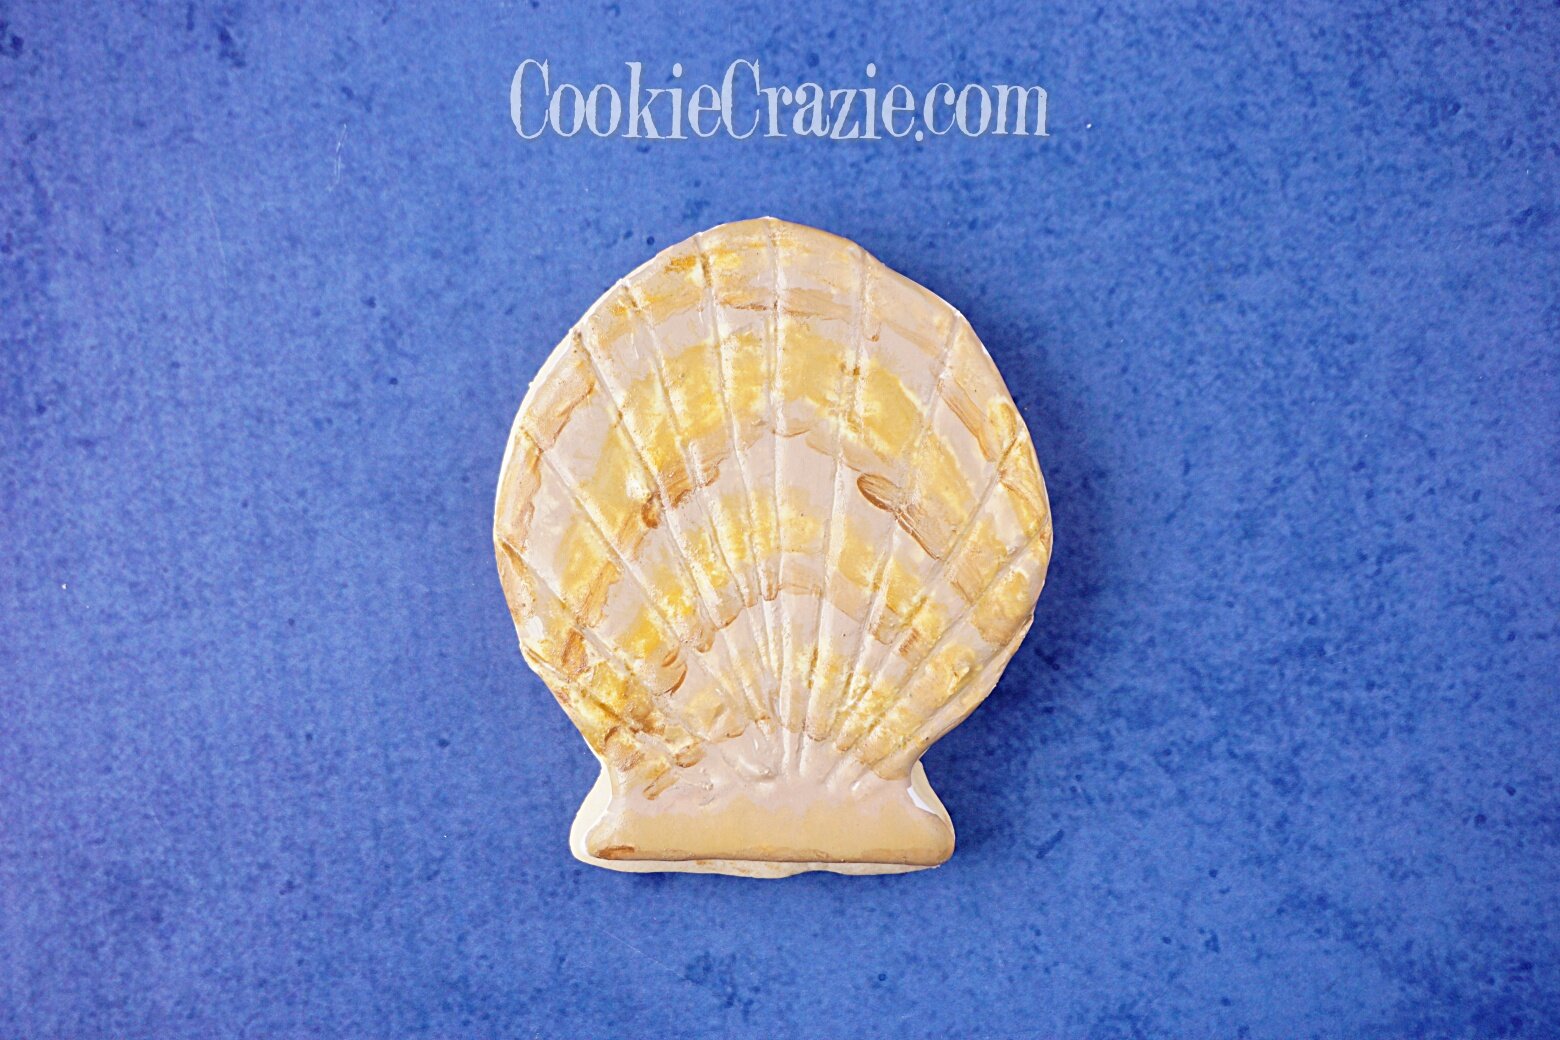  Seashell Decorated Sugar Cookie YouTube video  HERE  